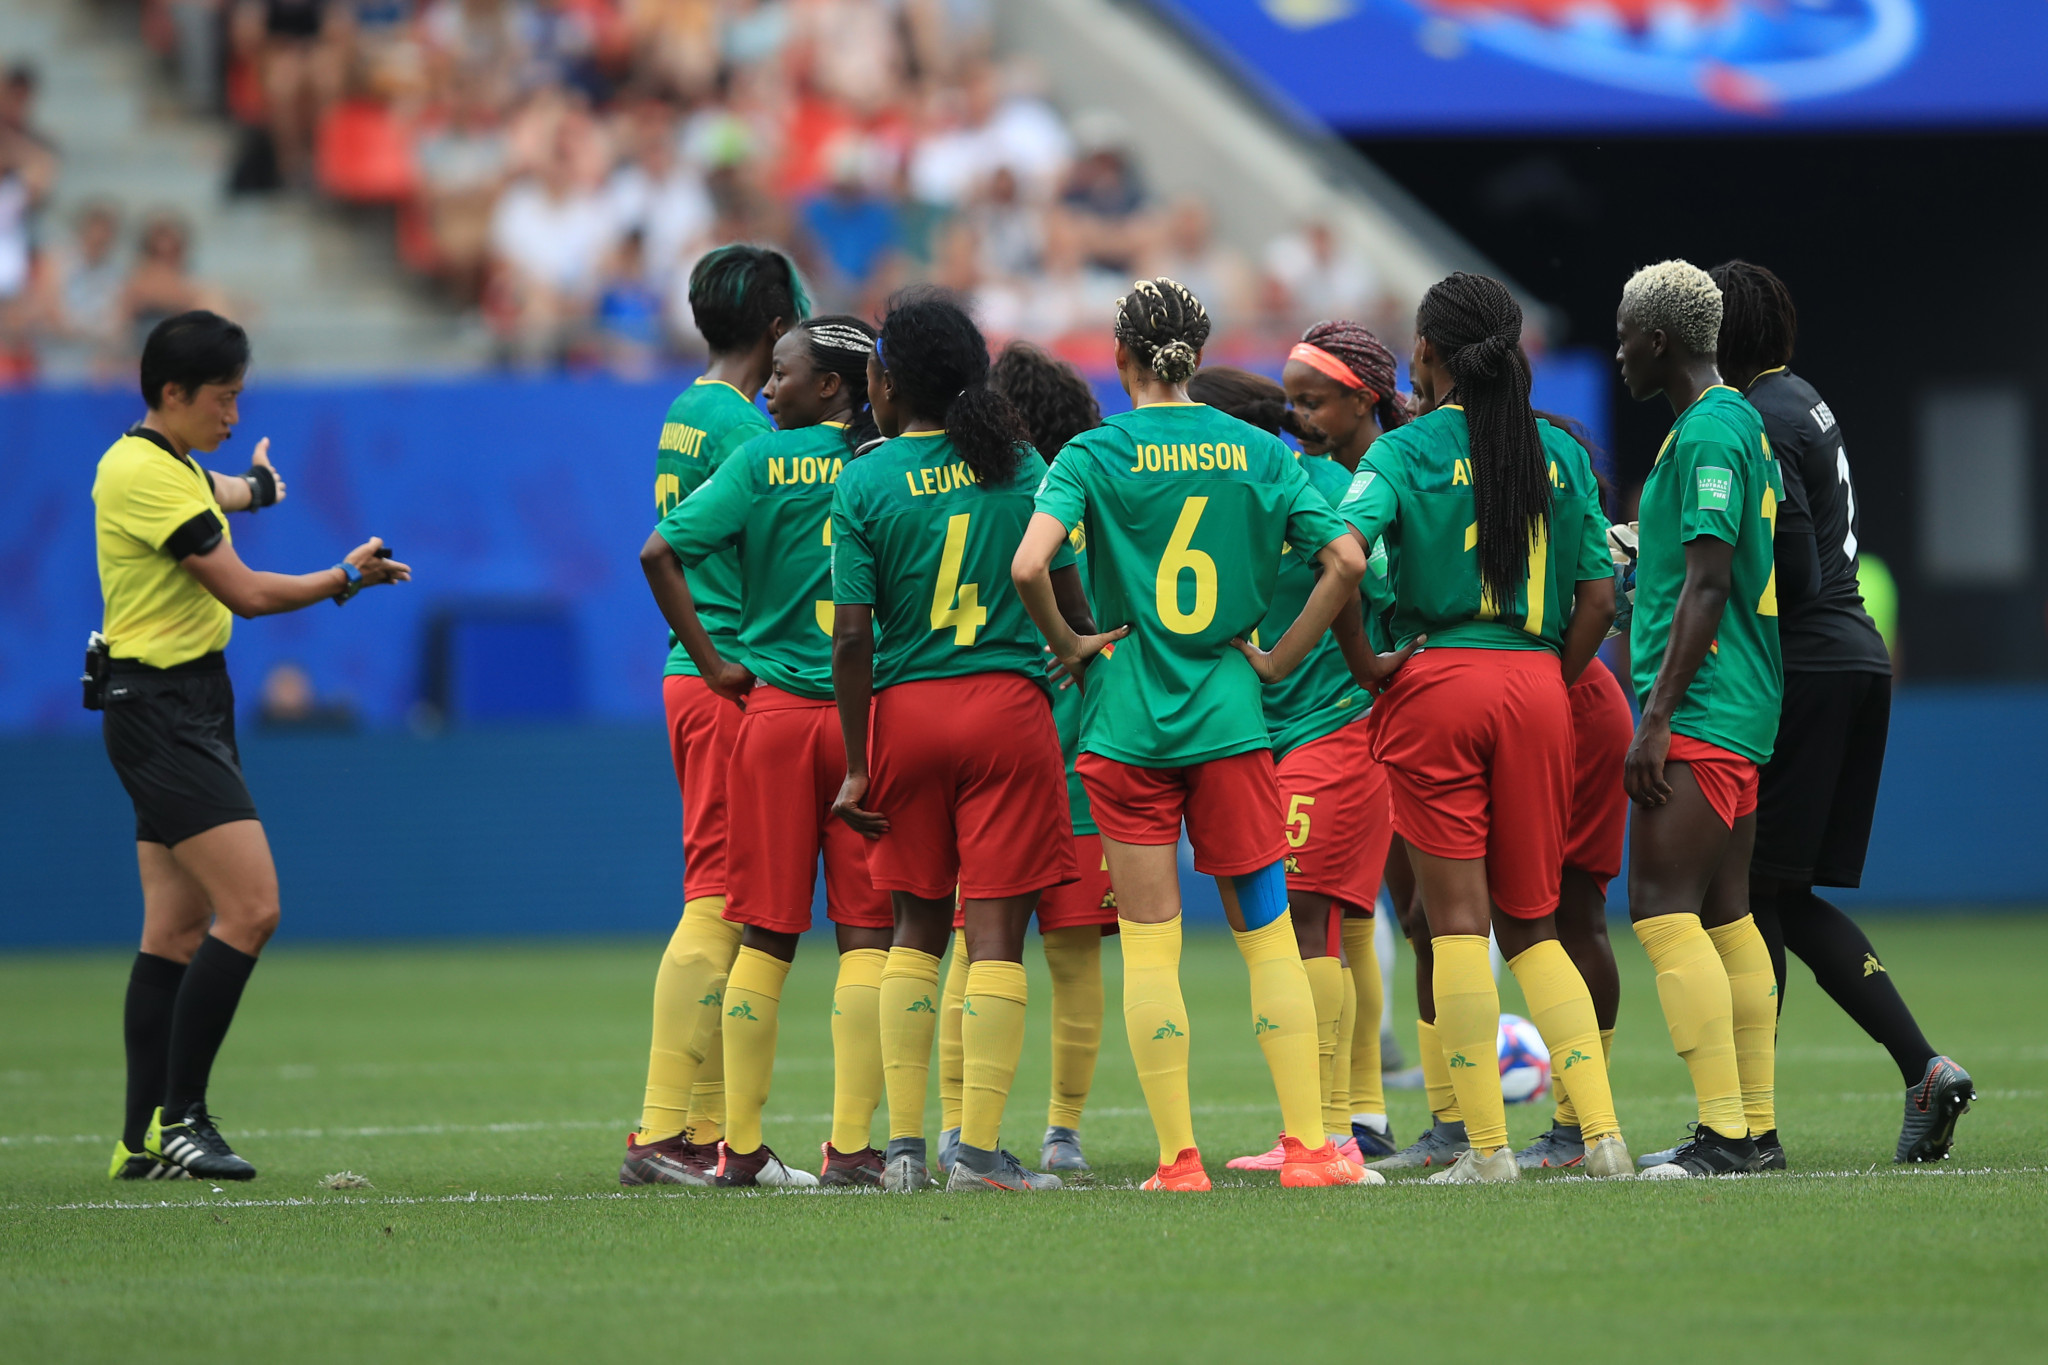 Cameroon players protested on the pitch as they lost to England in their last-16 FIFA Women's World Cup match ©Getty Images